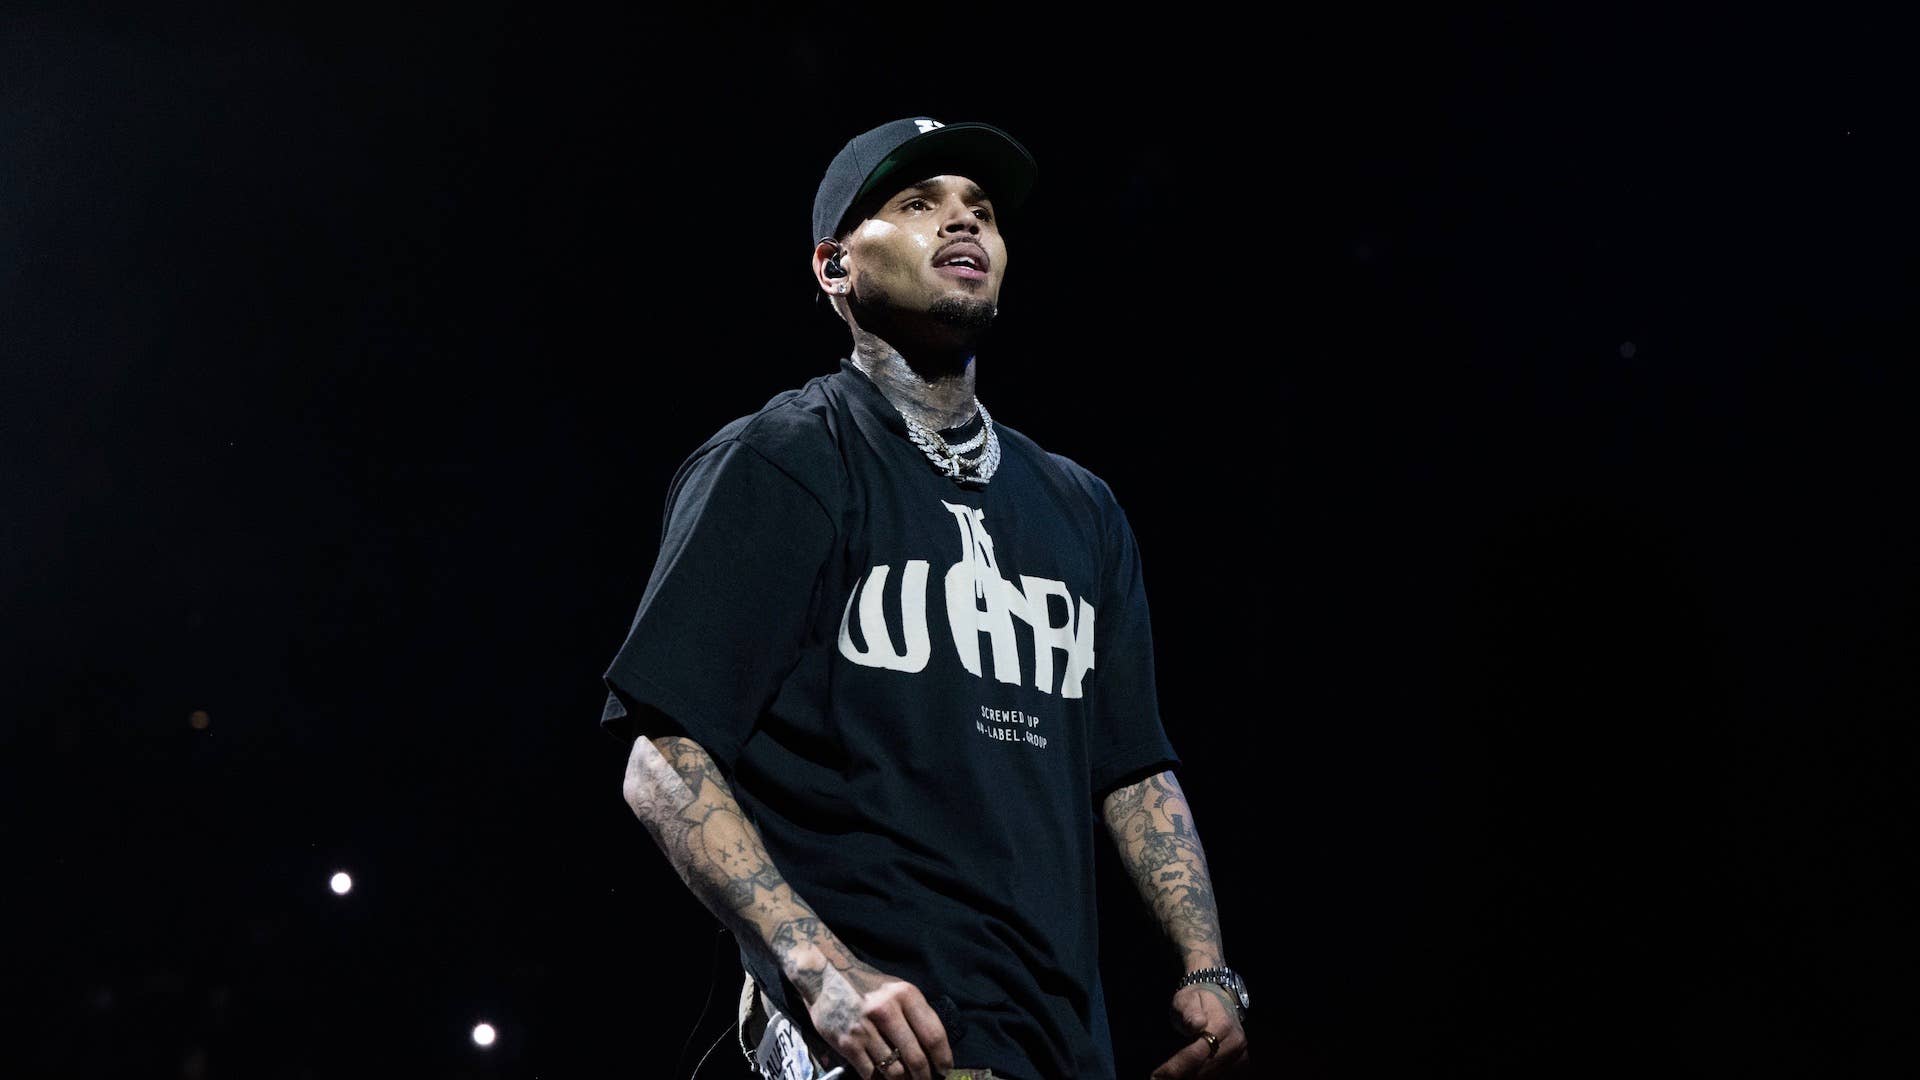 Singer Chris Brown performs onstage during the 'One of Them Ones Tour'